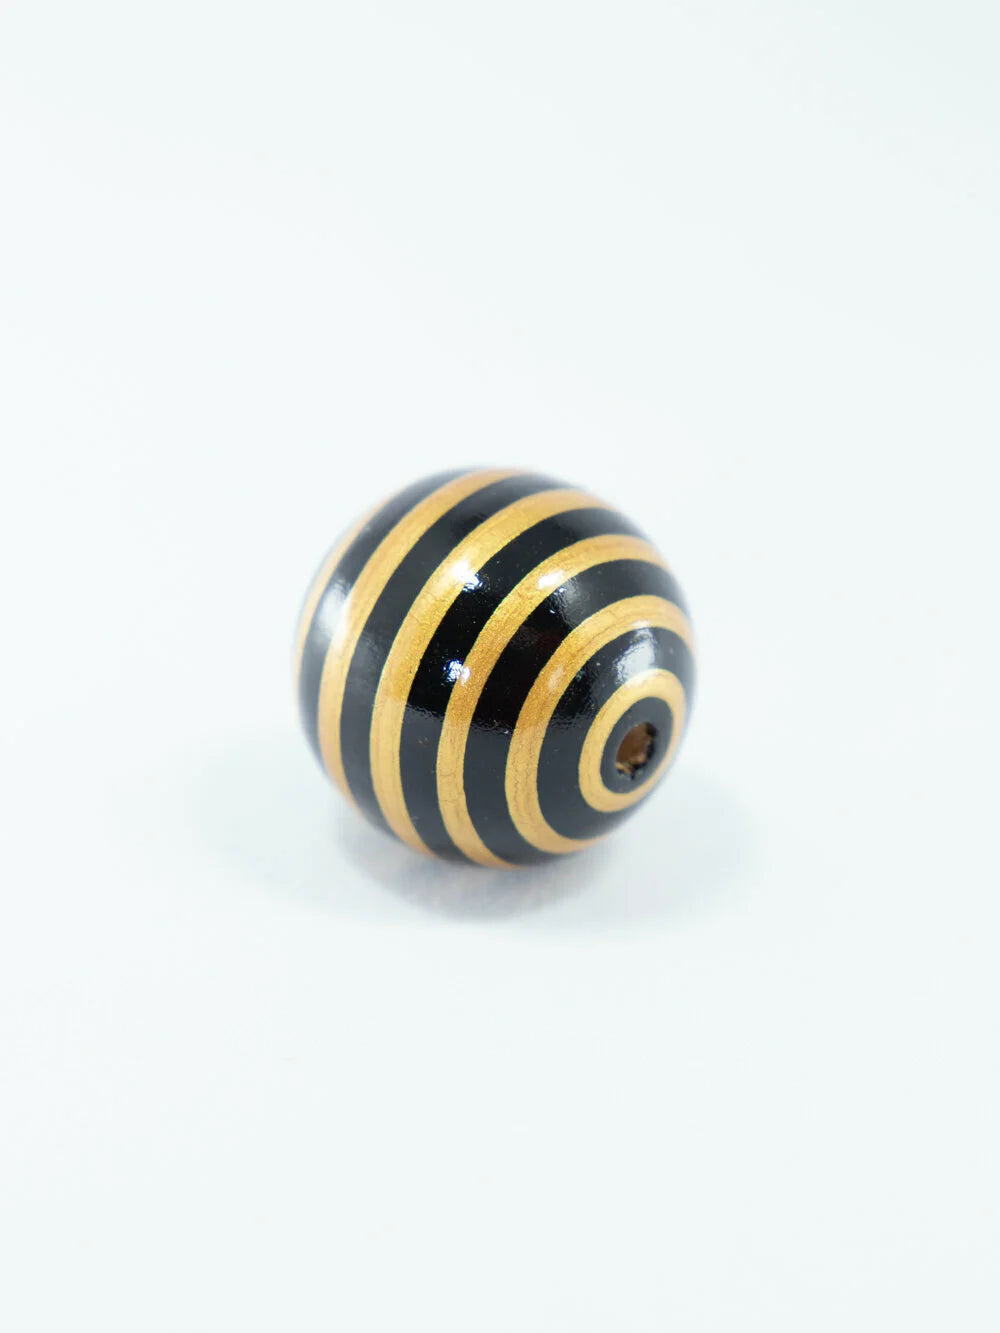 Golden and Black Striped Wooden Bead